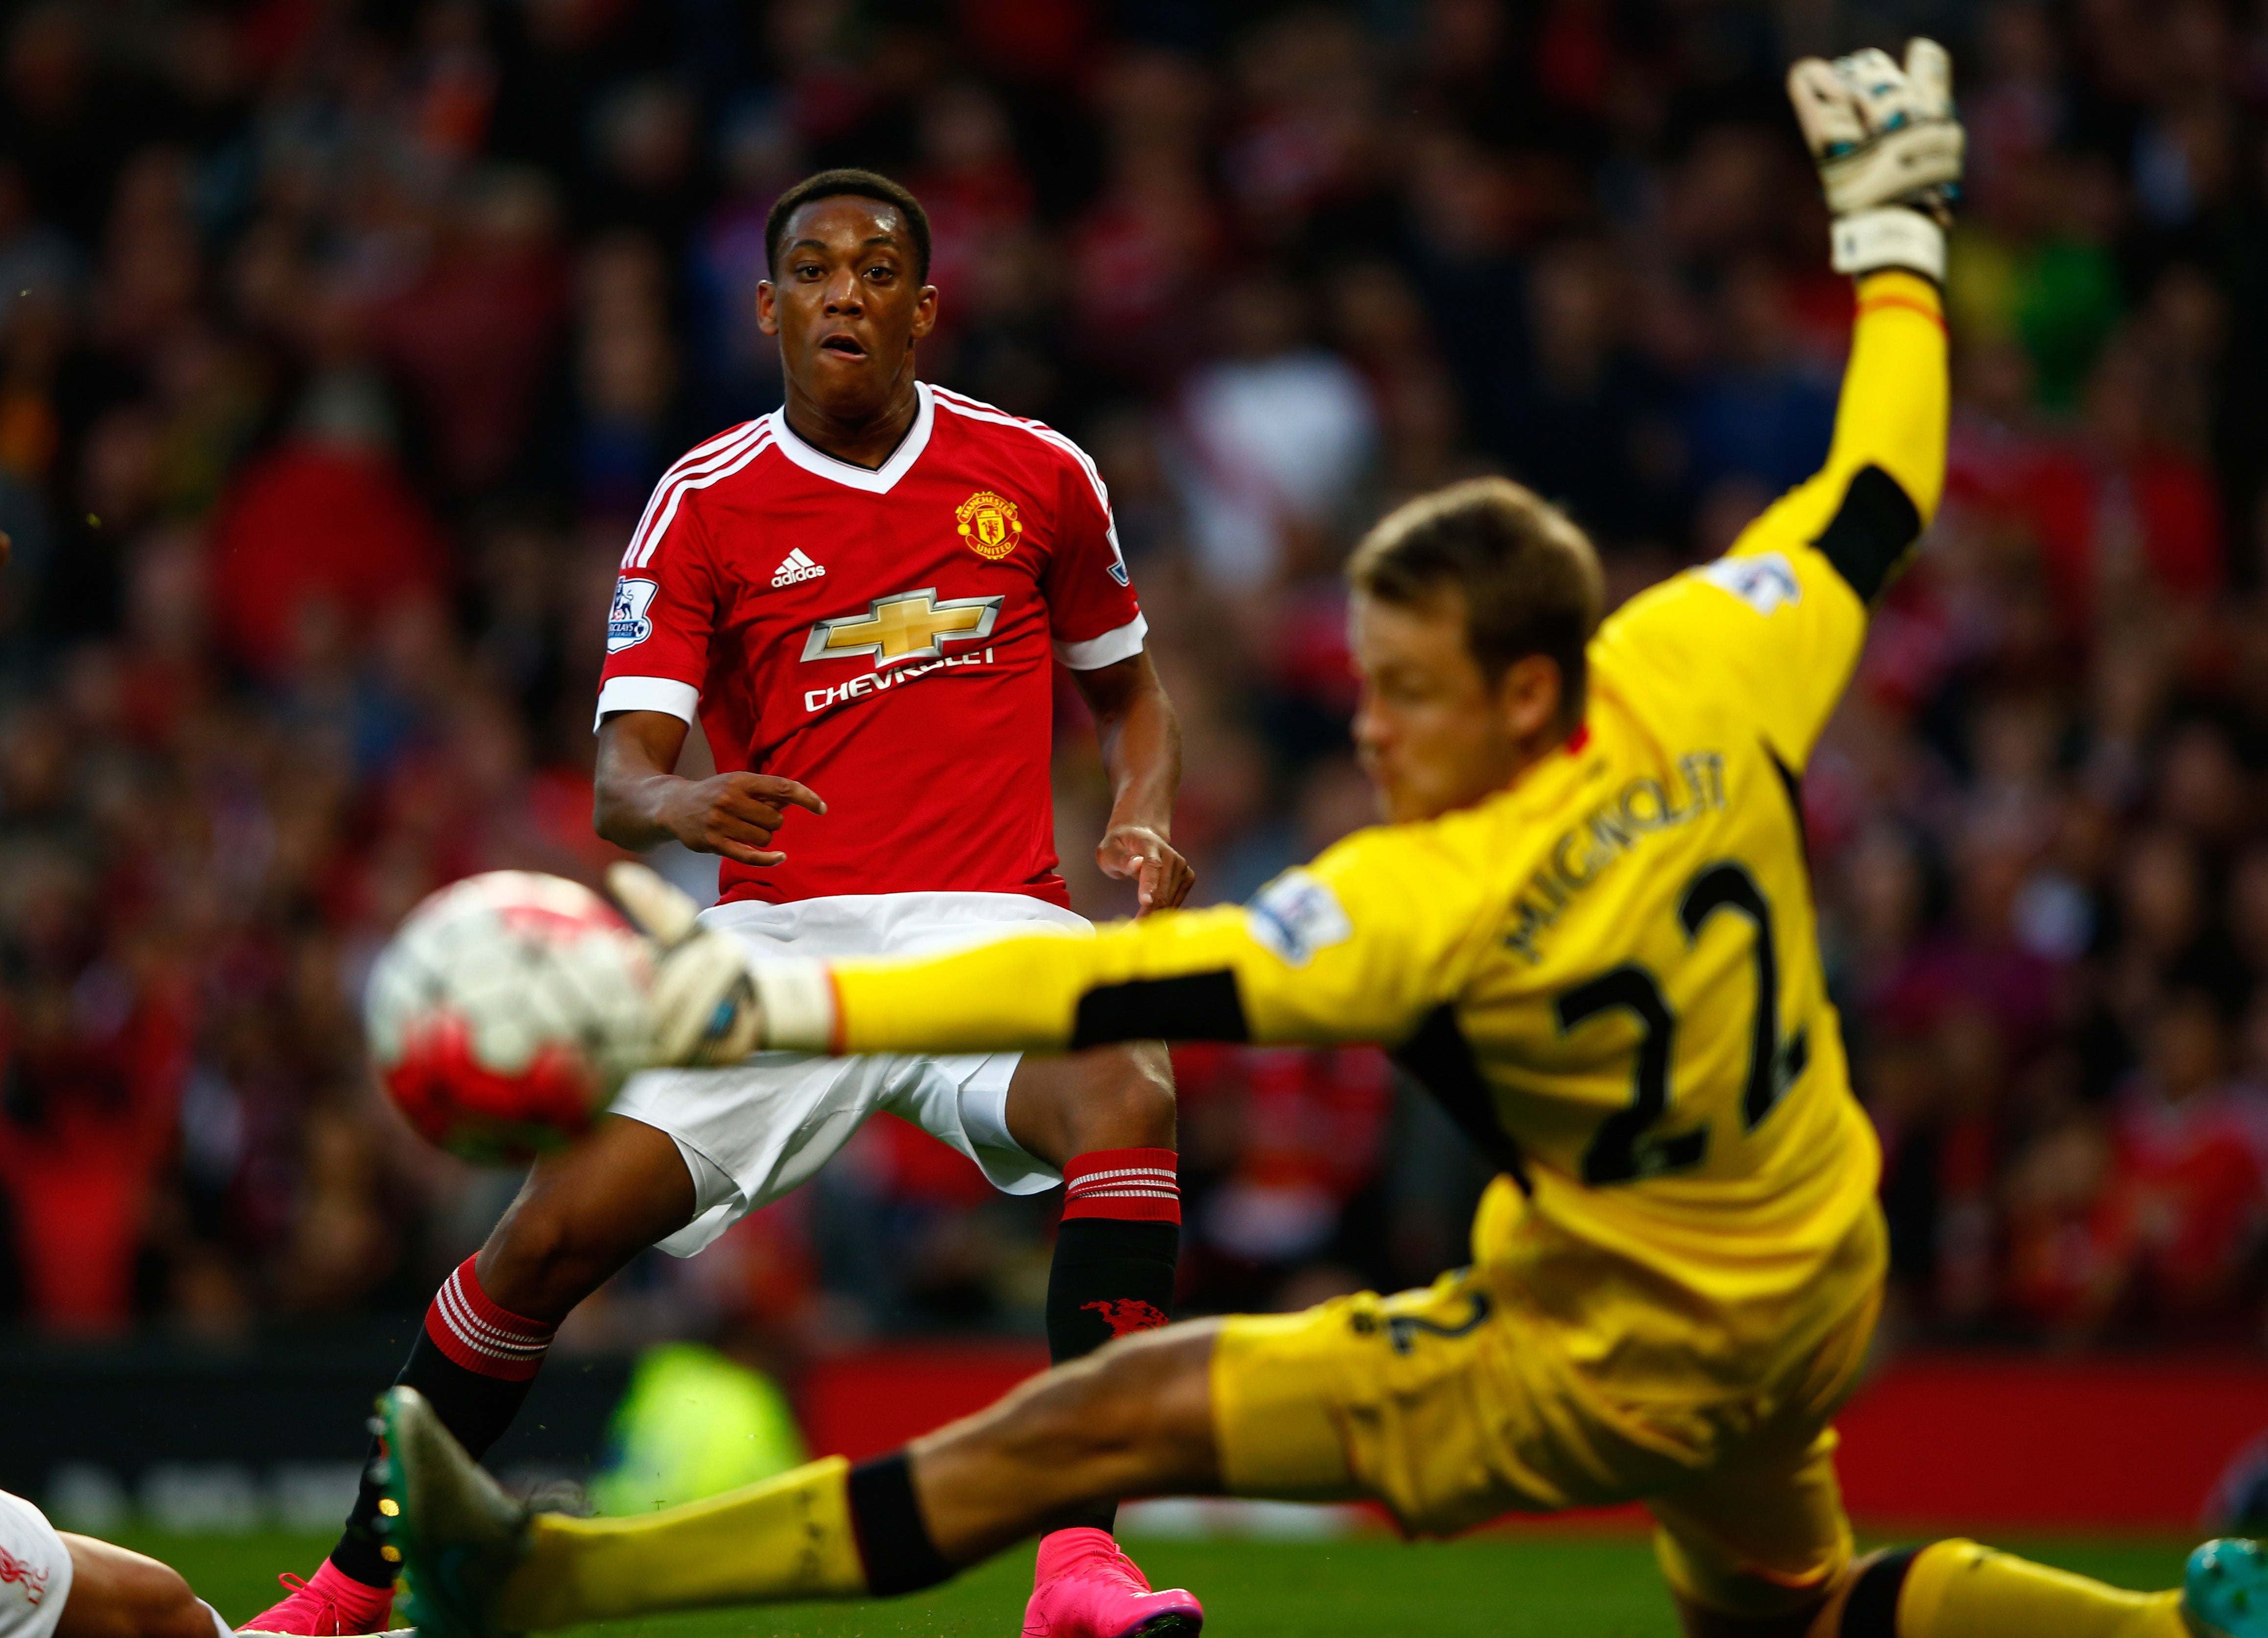 Anthony Martial slots the ball past Simon Mignolet to score his debut goal